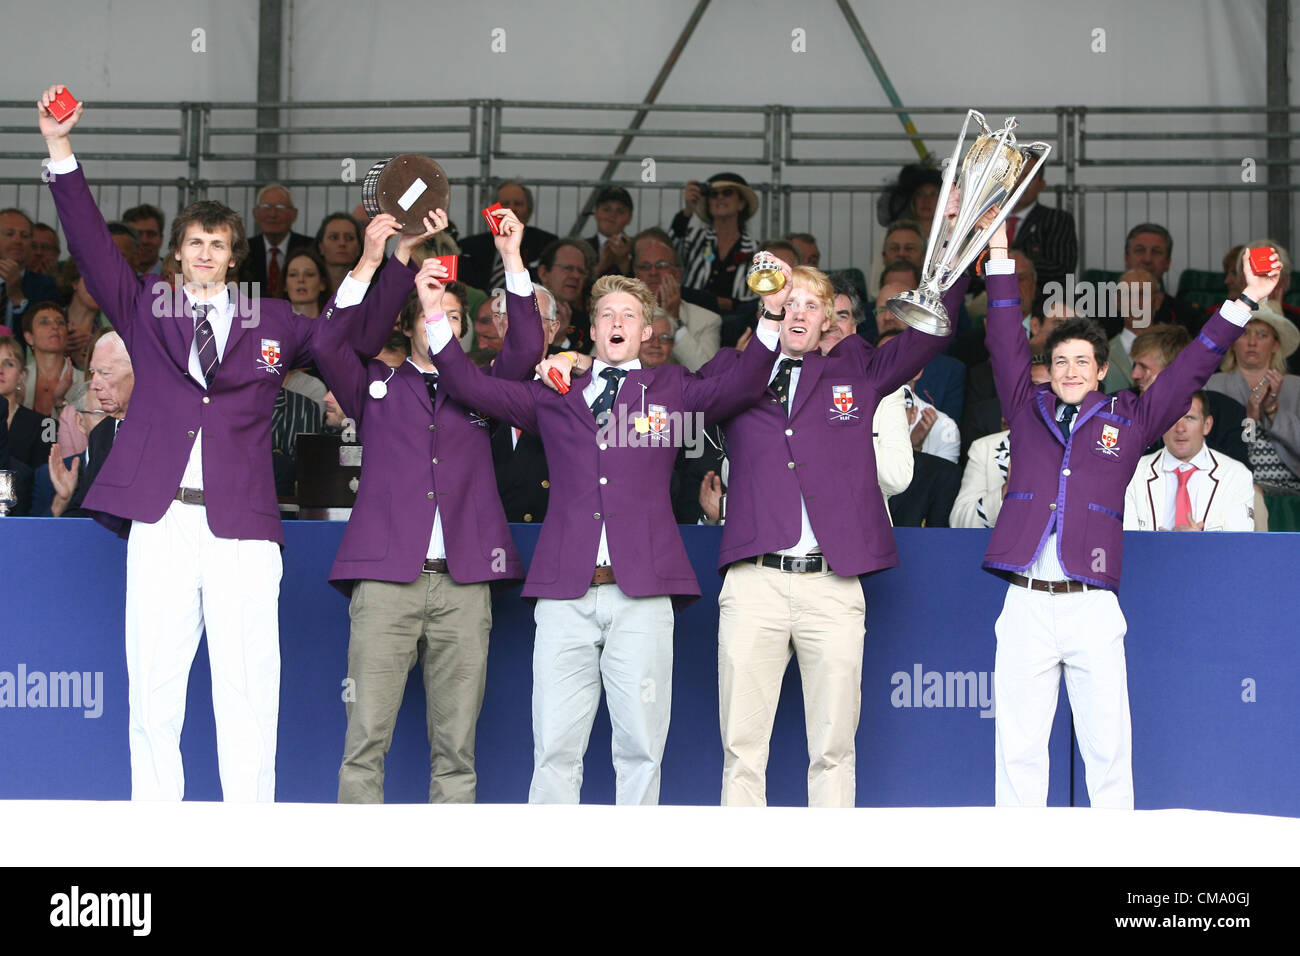 01.07.2012. Henley-on-Thames, Oxfordshire, England. The Henley Royal Regatta 2012. University of London 'A' lift the trophy after winning the Prince Albert Challenge Cup Stock Photo